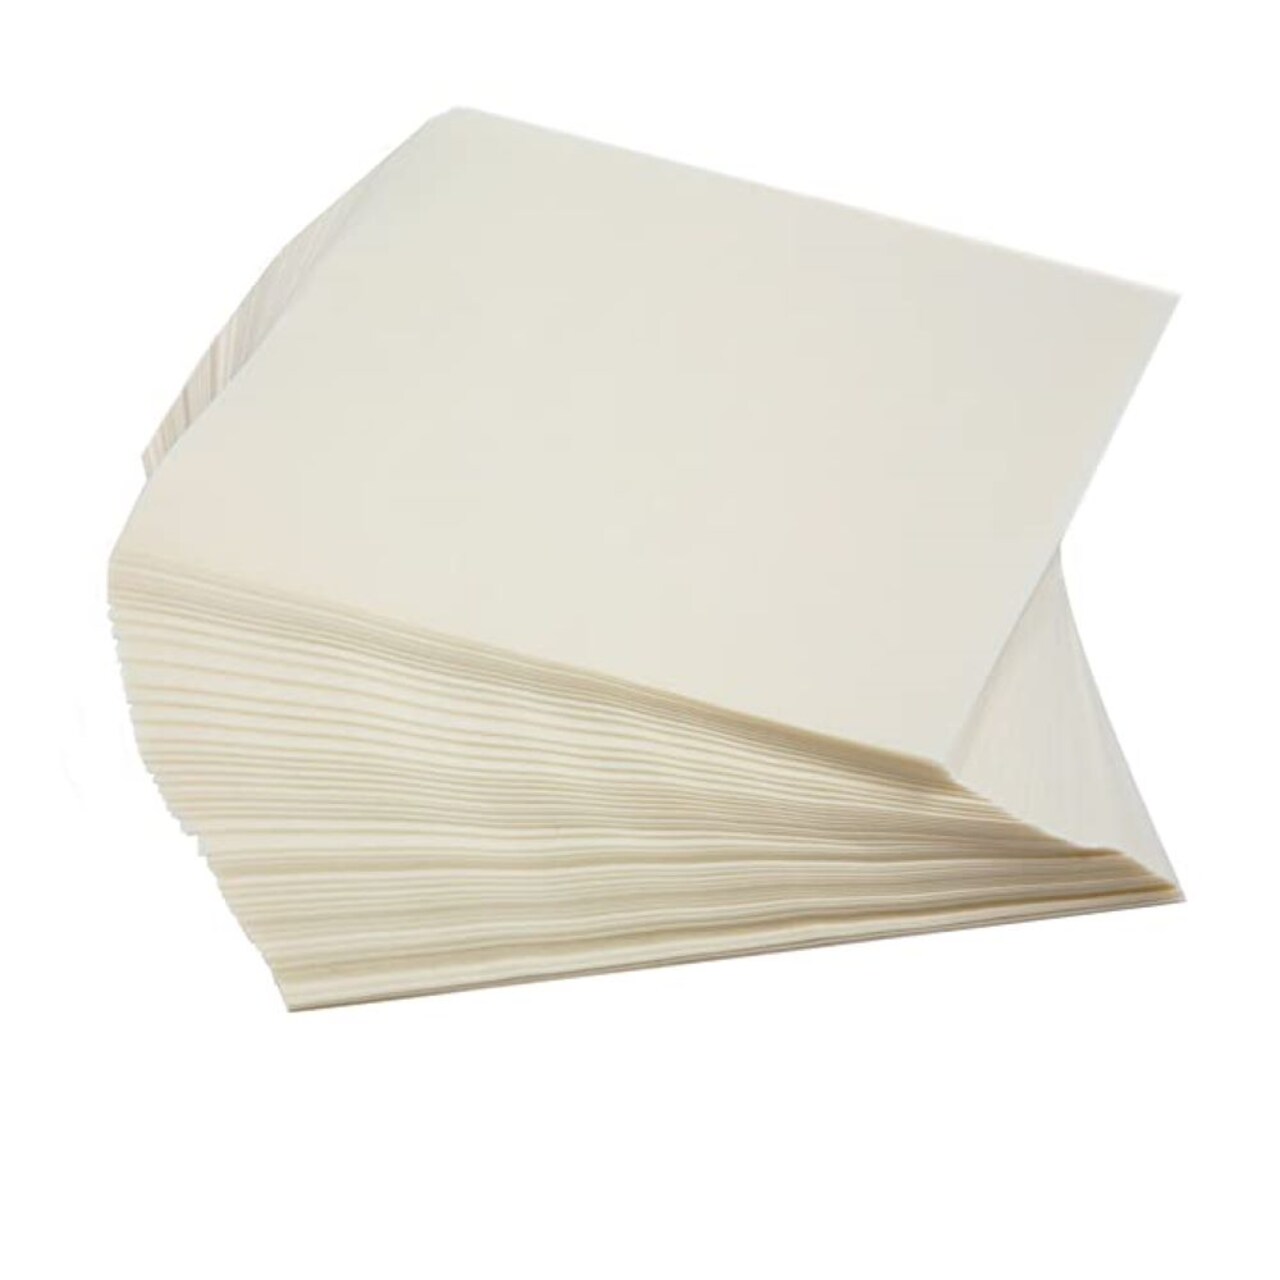 Norpro Wax Paper, Square, S250 Sheets